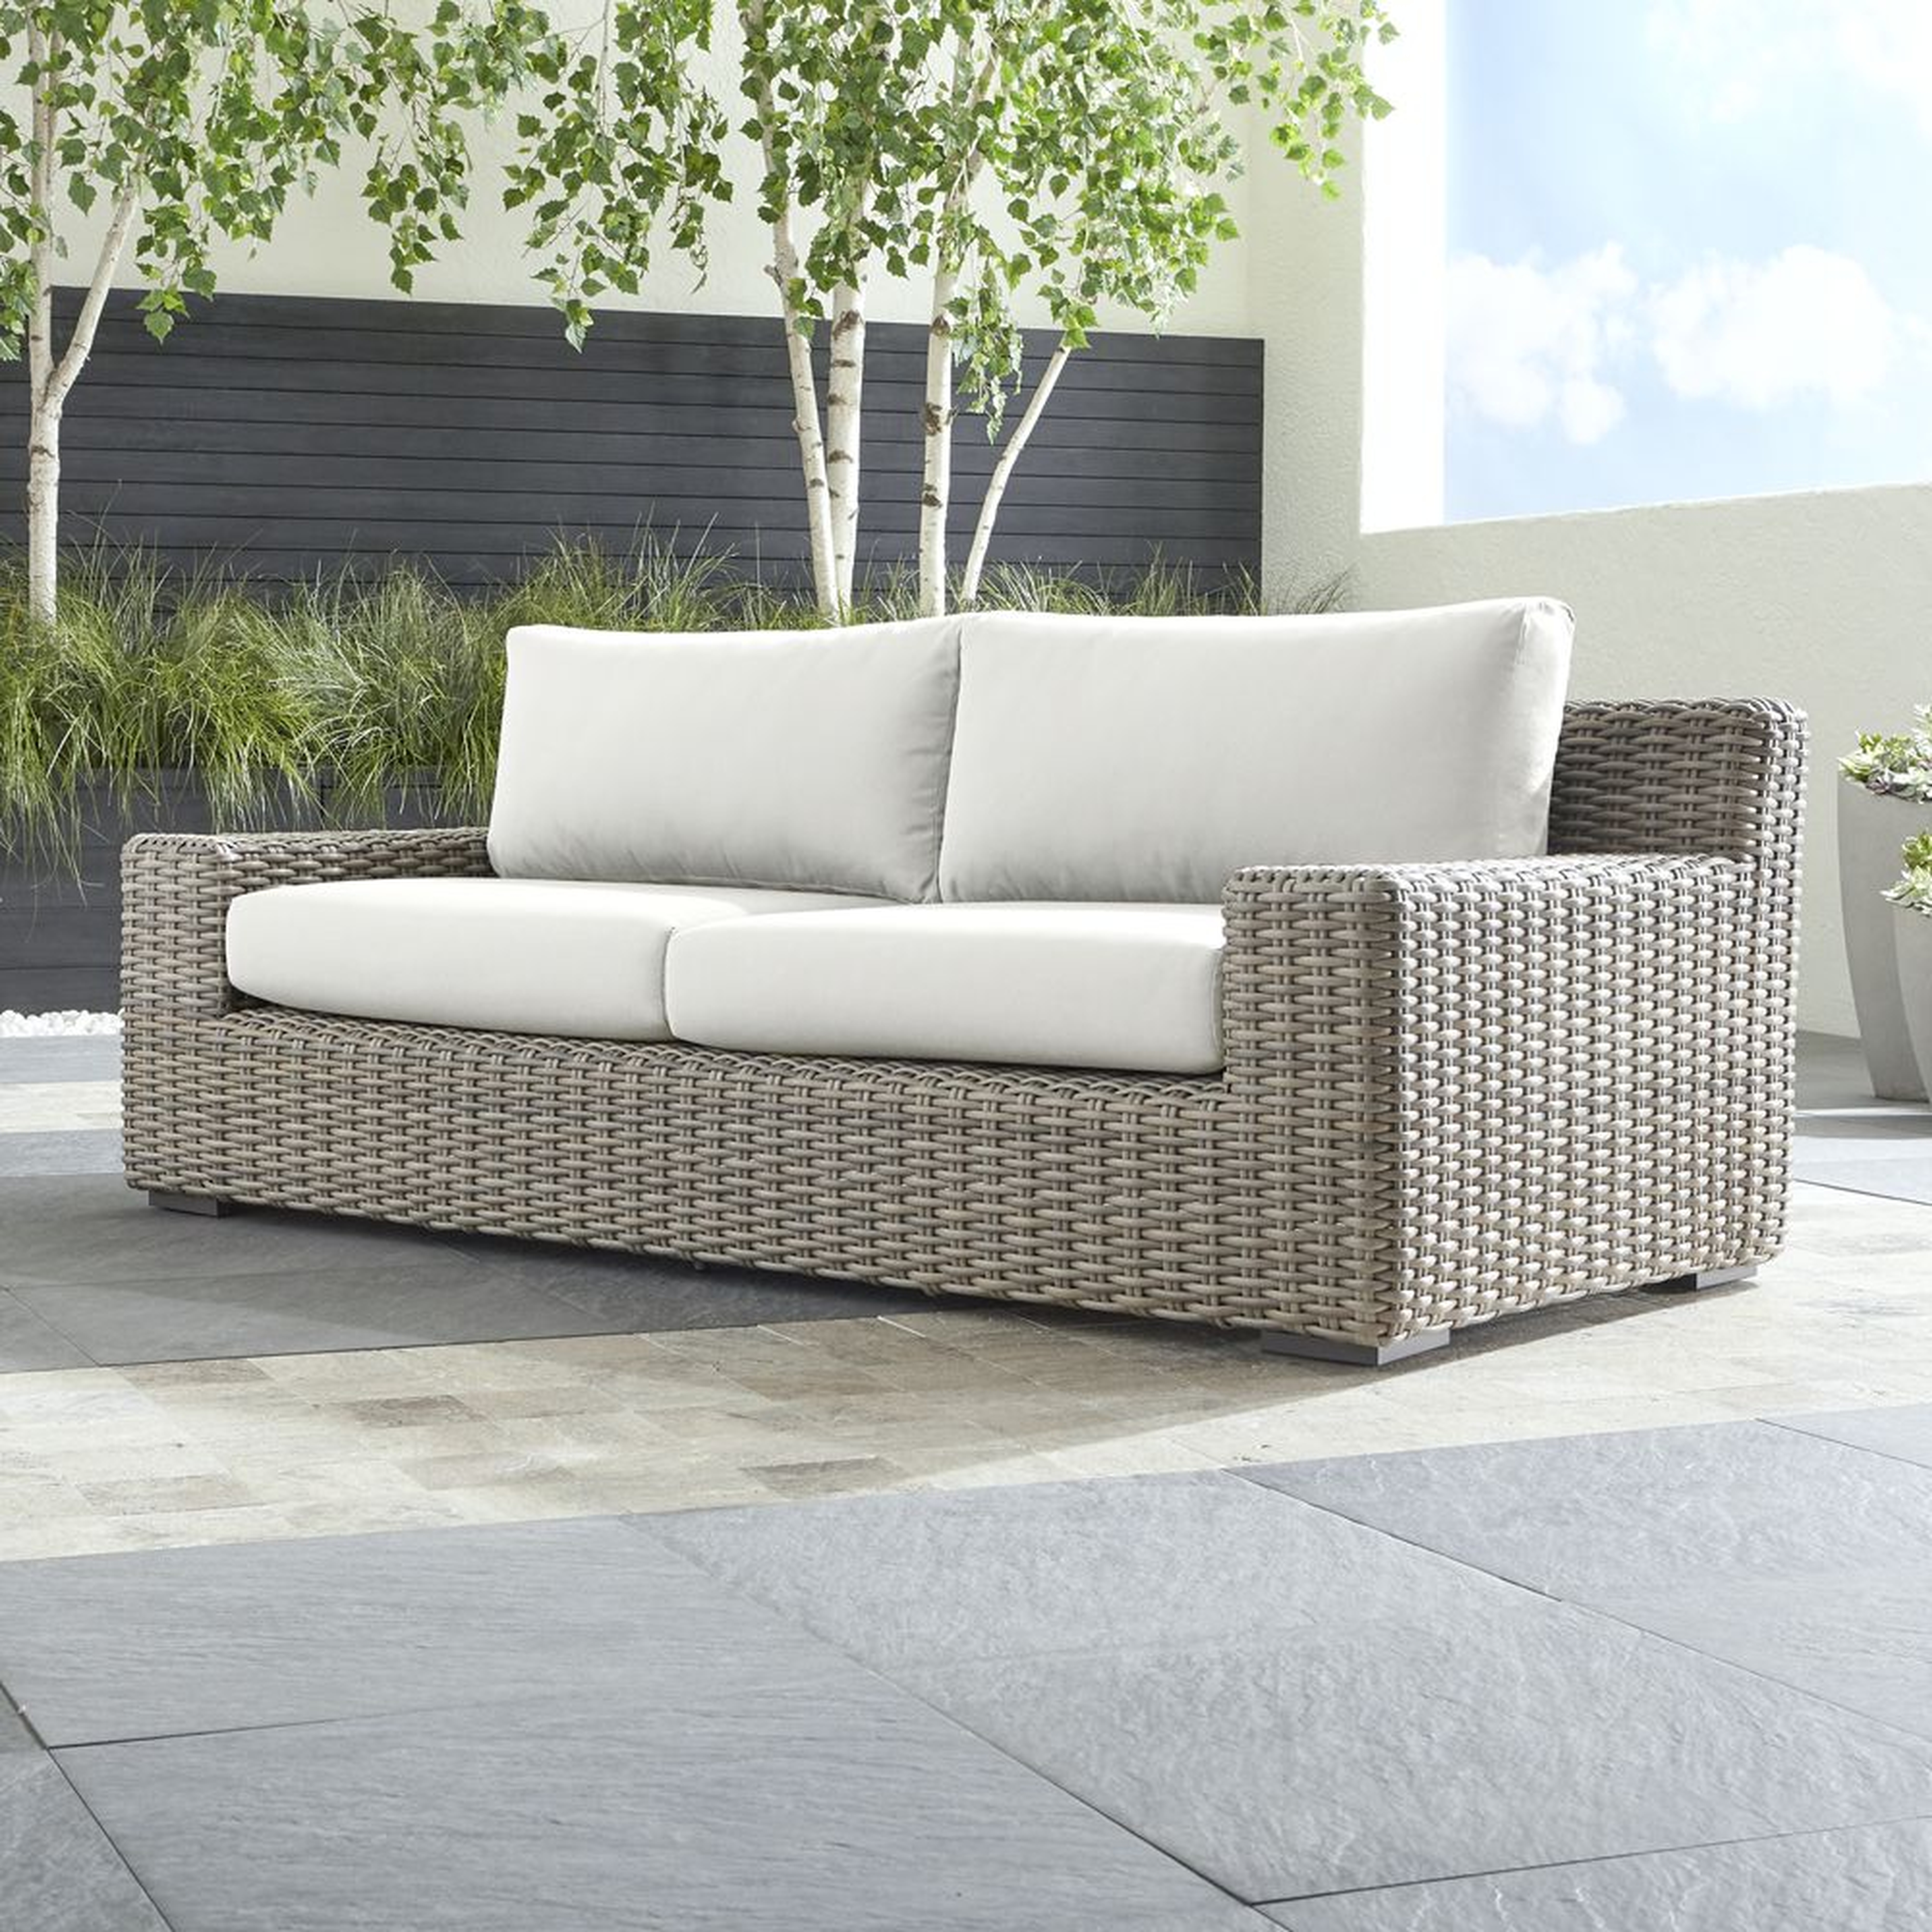 Cayman Outdoor Sofa with White Sand Sunbrella ® Cushions - Crate and Barrel